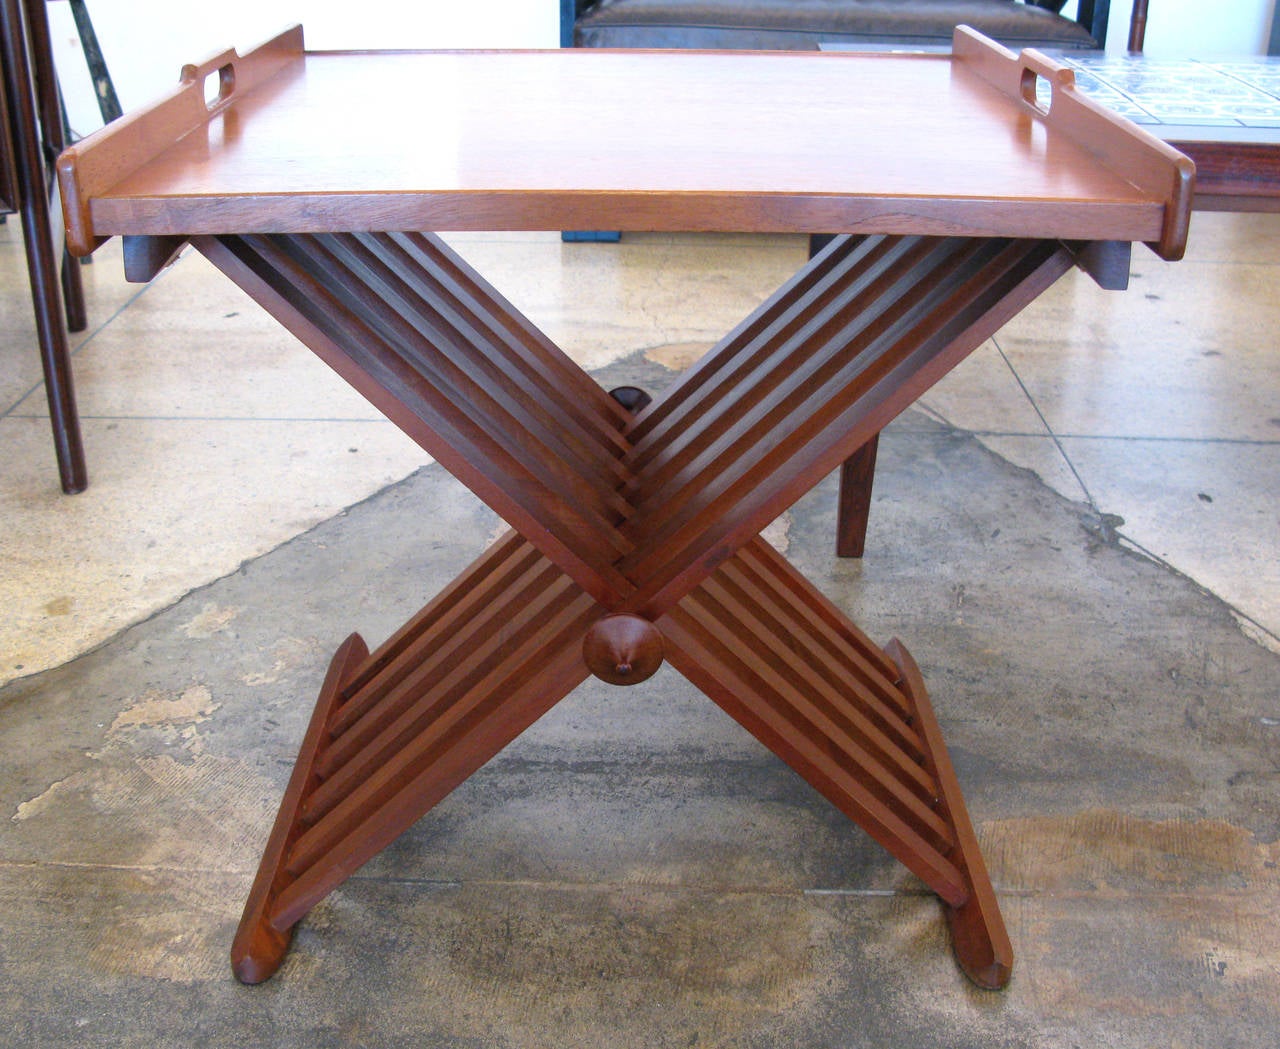 Designed by Kipp Stewart and Stuart MacDougall for the Drexel Declaration Line, circa 1960. The removable tray sits on top of the folding base and is stamped on the underside. Tray surface measures 19.5